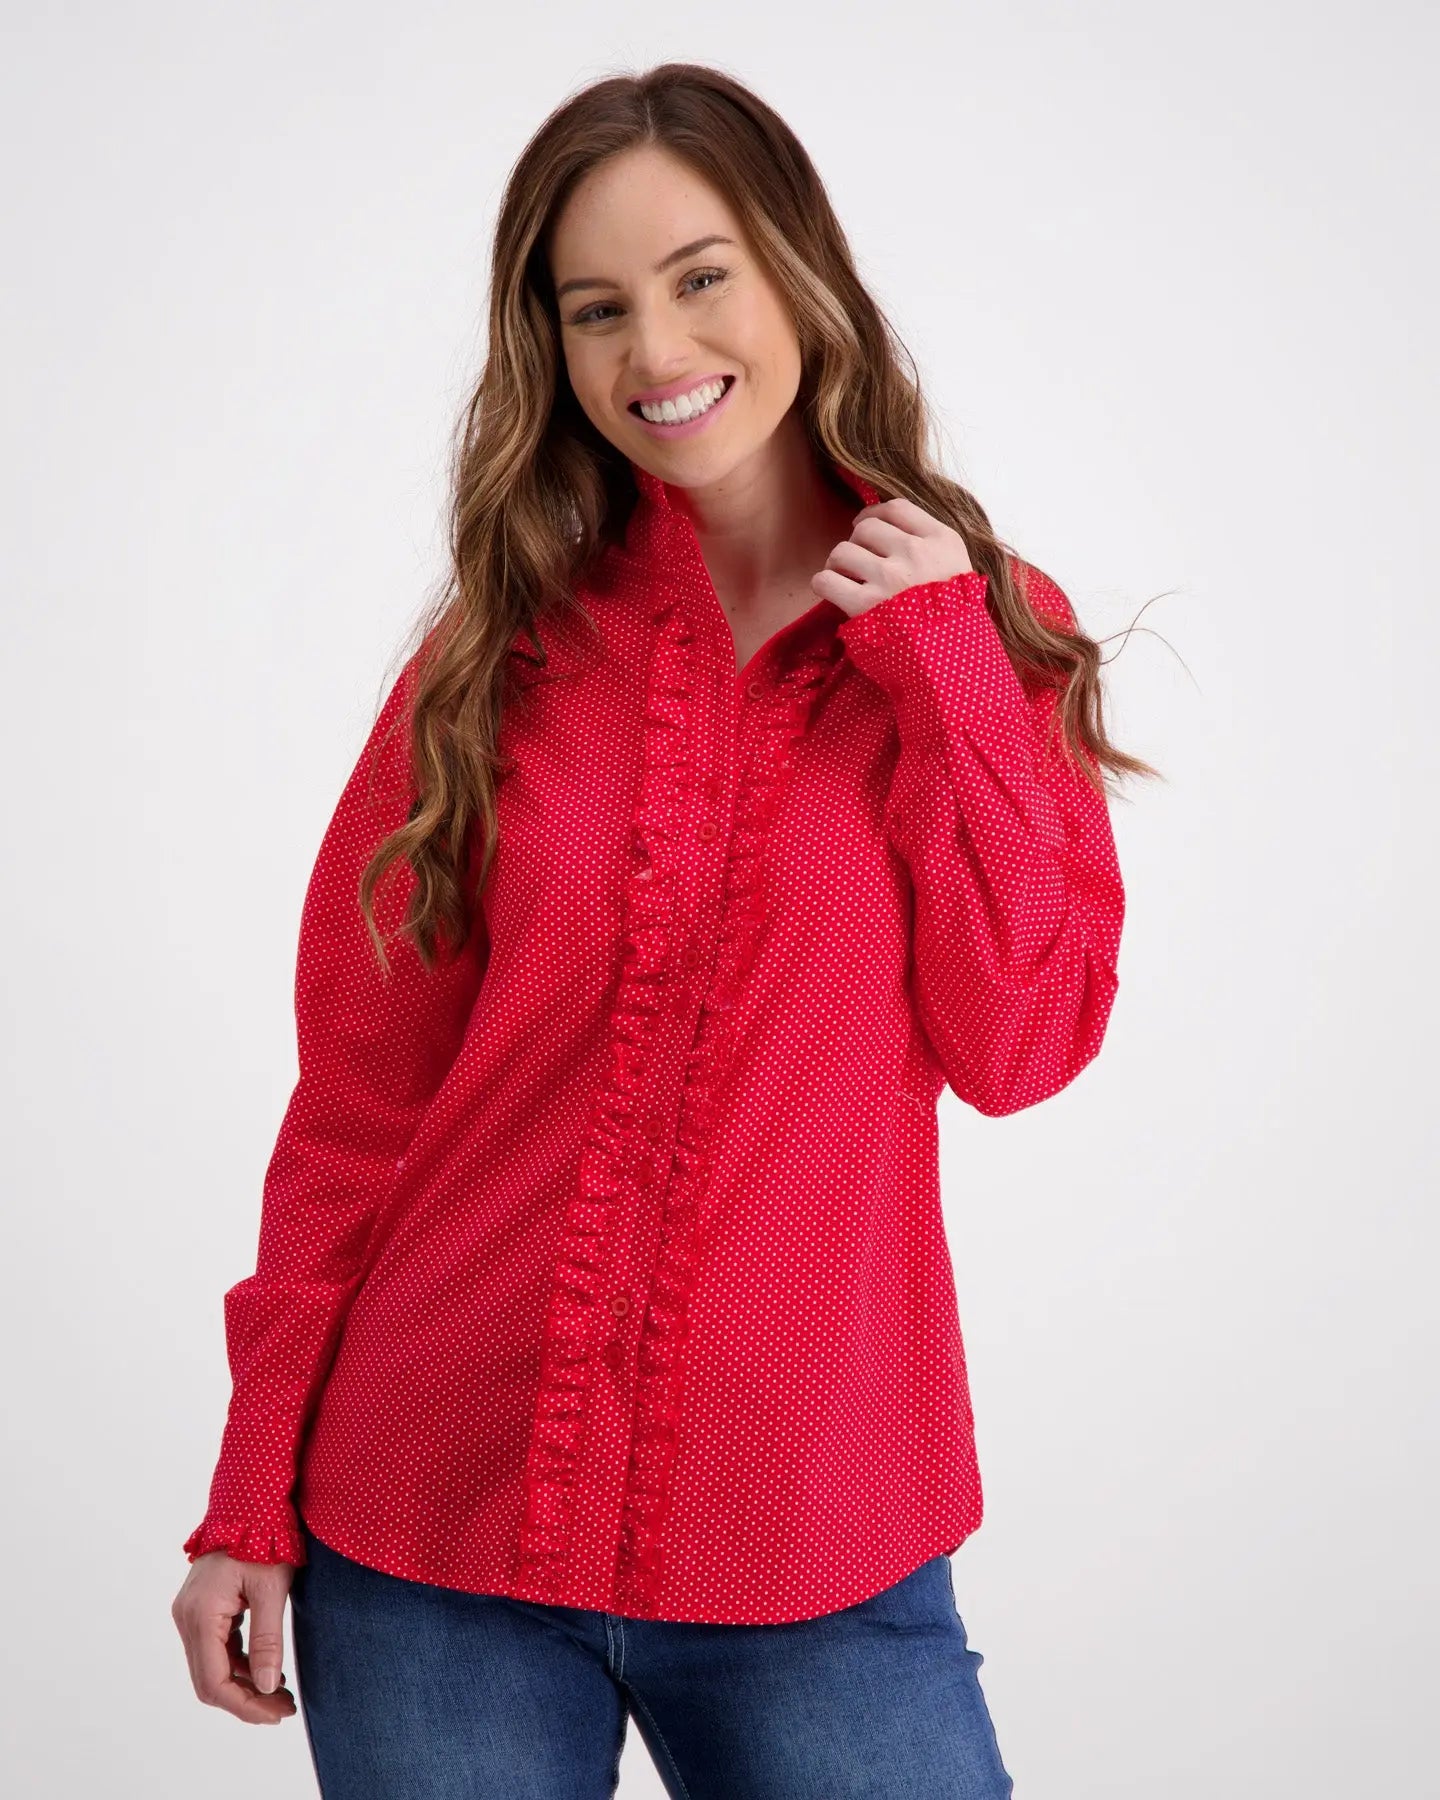 Red Ruffled Shirt With White Spots Outback Supply Co